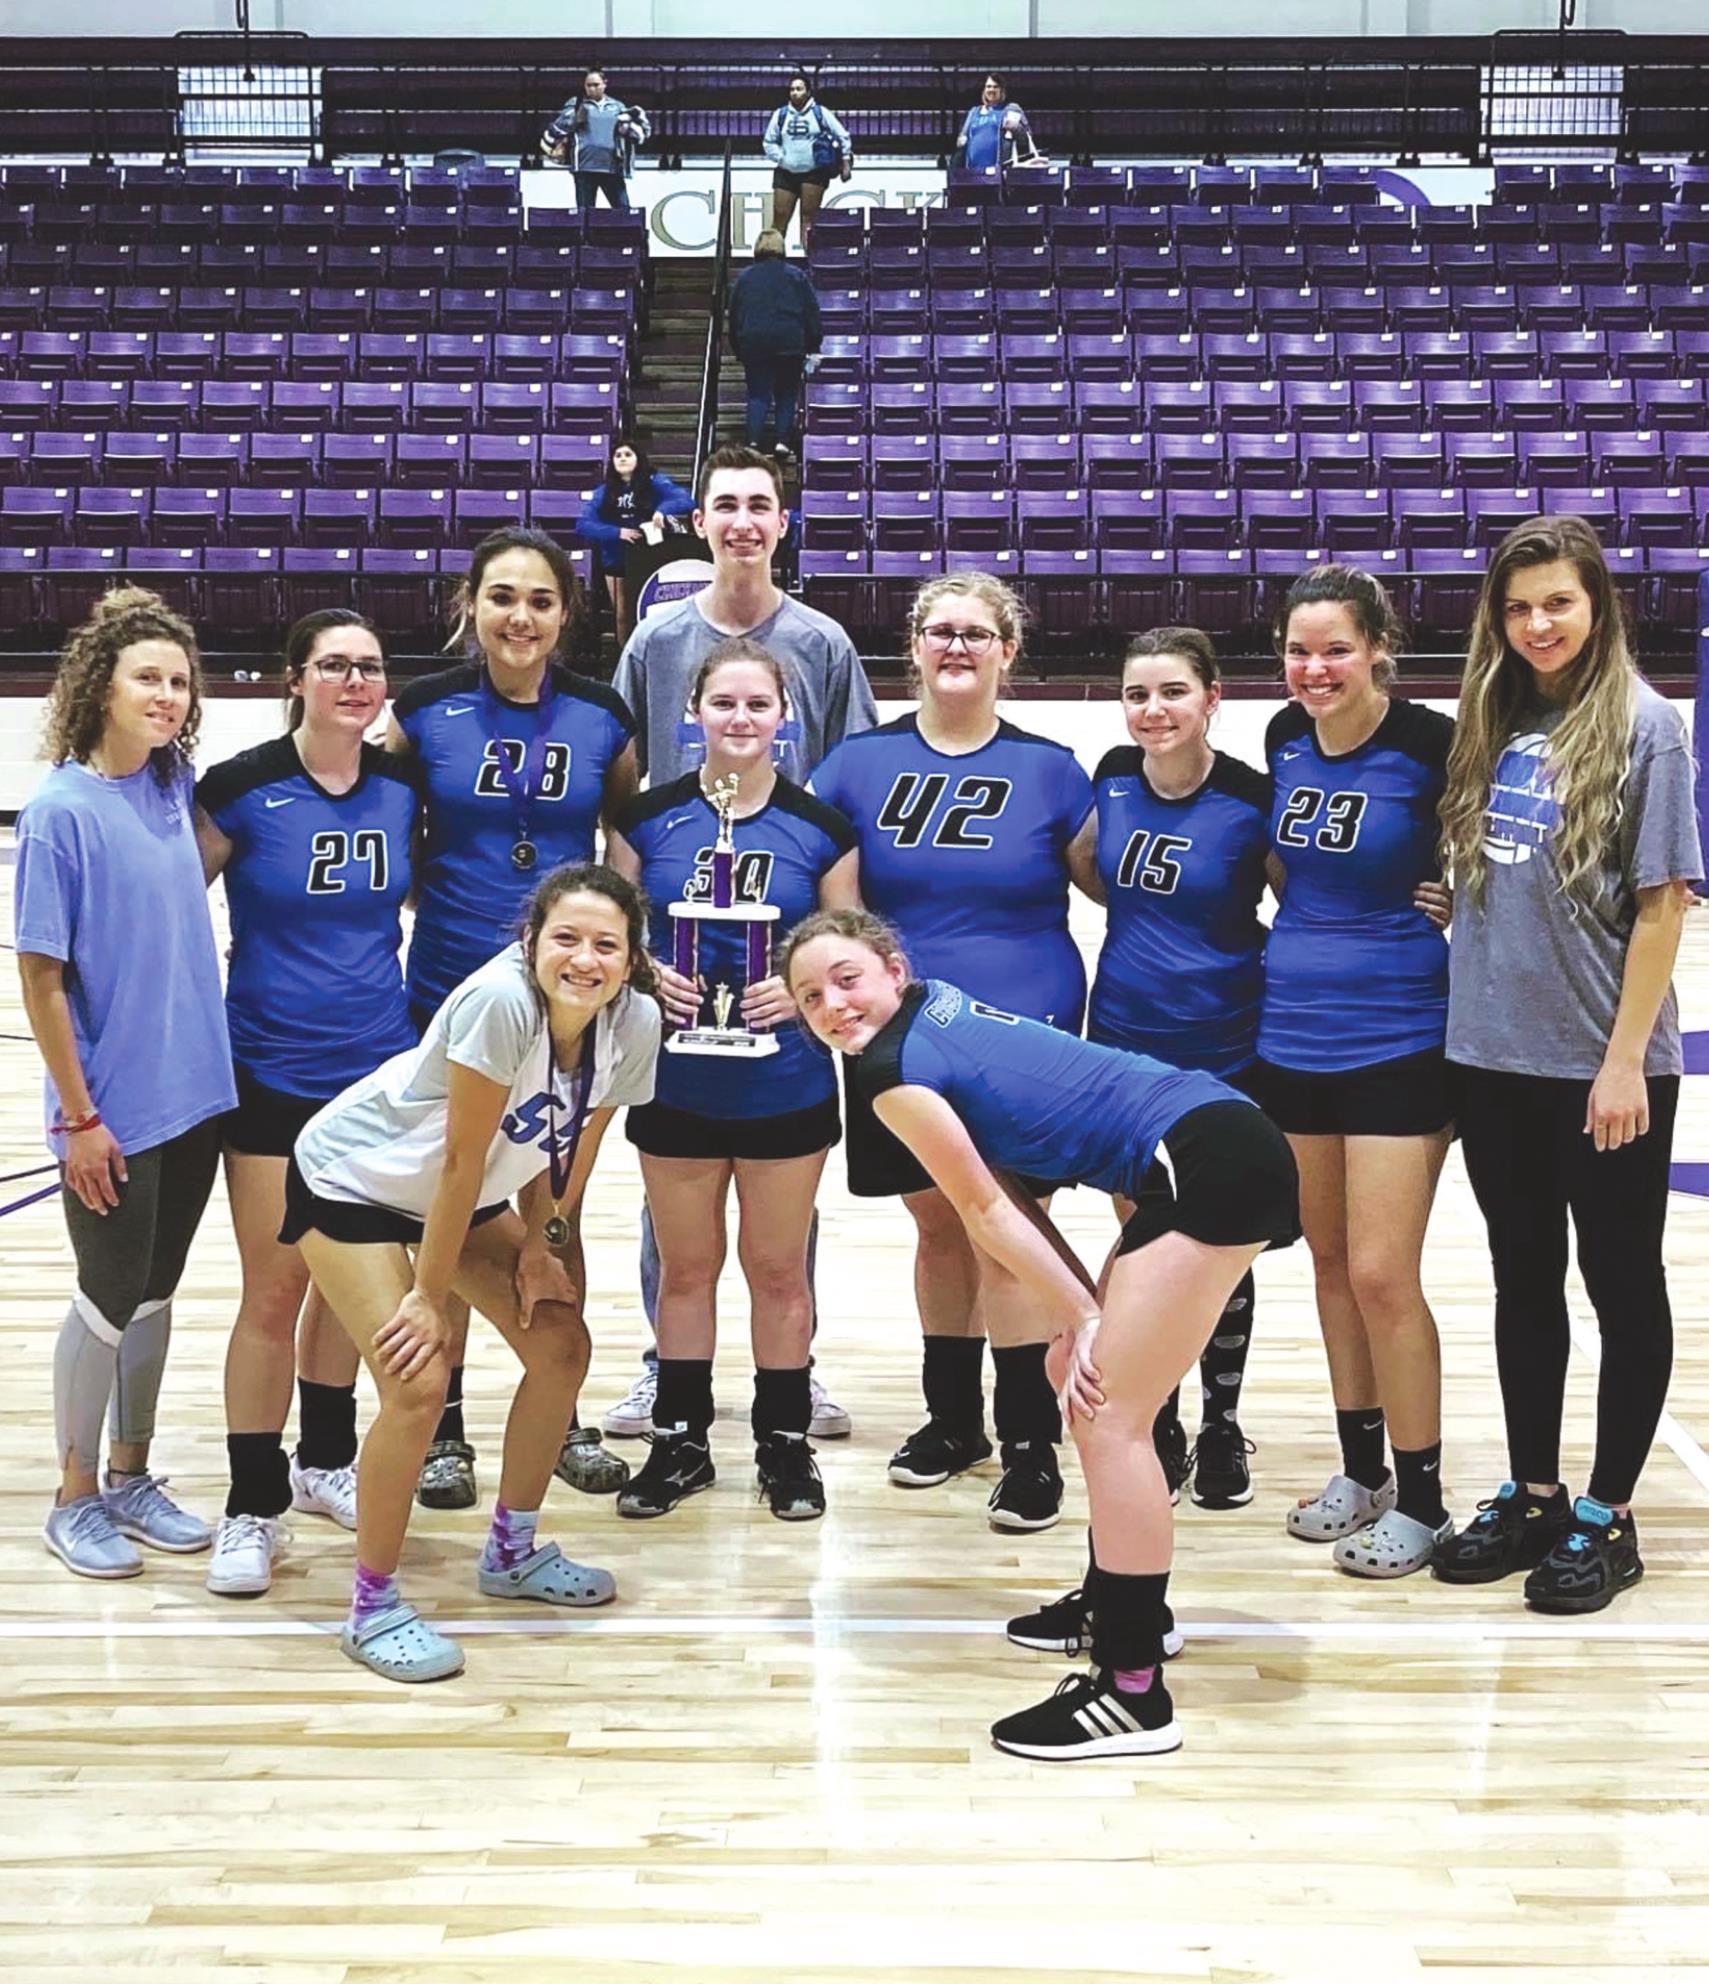 The Corn Bible Academy Lady Crusaders got runner up in the Chickasha Volleyball tournament Saturday. McKinsi Grube and Sofia Schmidt were recognized All-Tournament Team. Corn Bible beat Chickasha, Altus and Guymon. Both losses were to tournament champion Southeast. The Lady Crusaders also won at Clinton Thursday 3-2. Provided